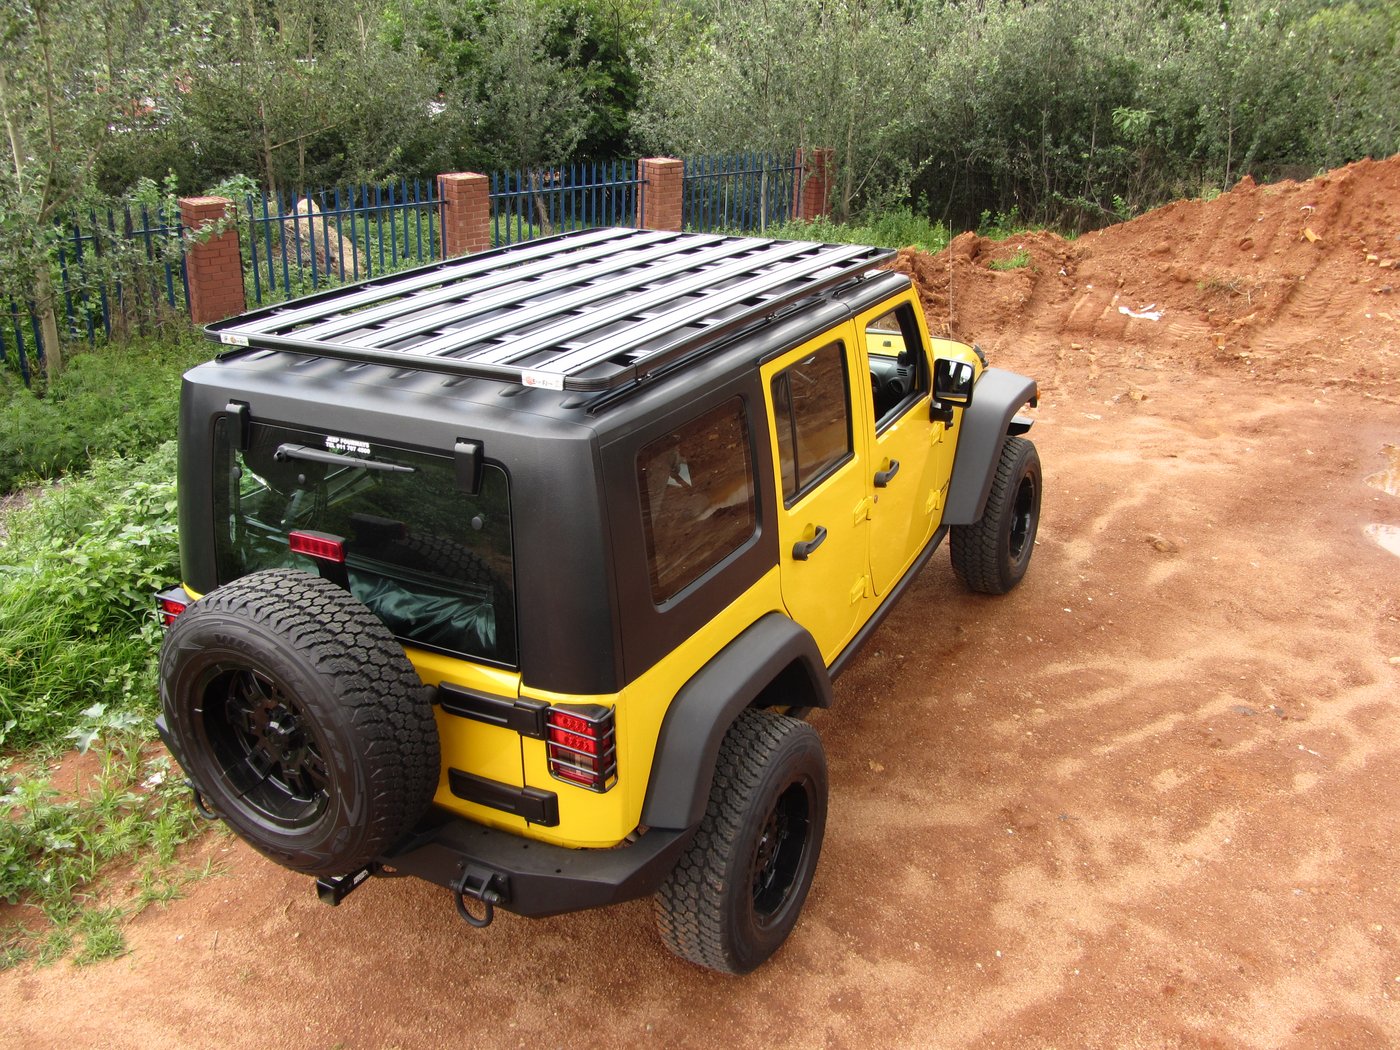 Eezi-Awn K9 Roof Rack Kit For Jeep Wrangler - FREE Shipping! – Off